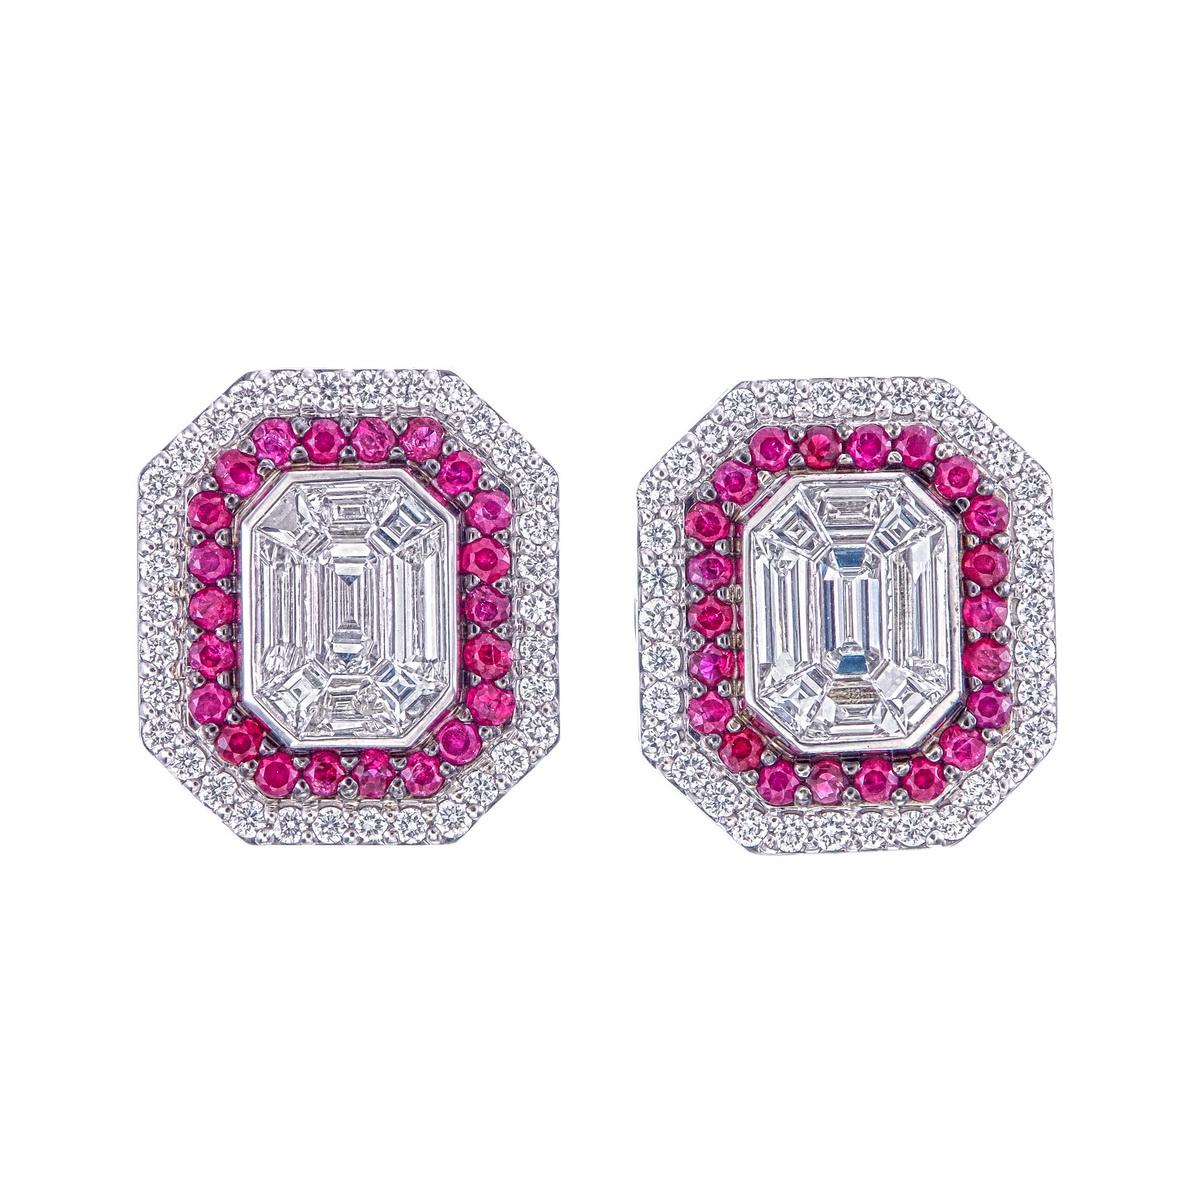 This pair of earrings is made with 1.10 carat diamonds in composite setting giving a look of 4 carat pair. 
Extremely light on ears 
Natural Ruby & VVS clarity ,EF color diamonds are used
Push back mechanism
4 carat pair of emerald cut diamonds are